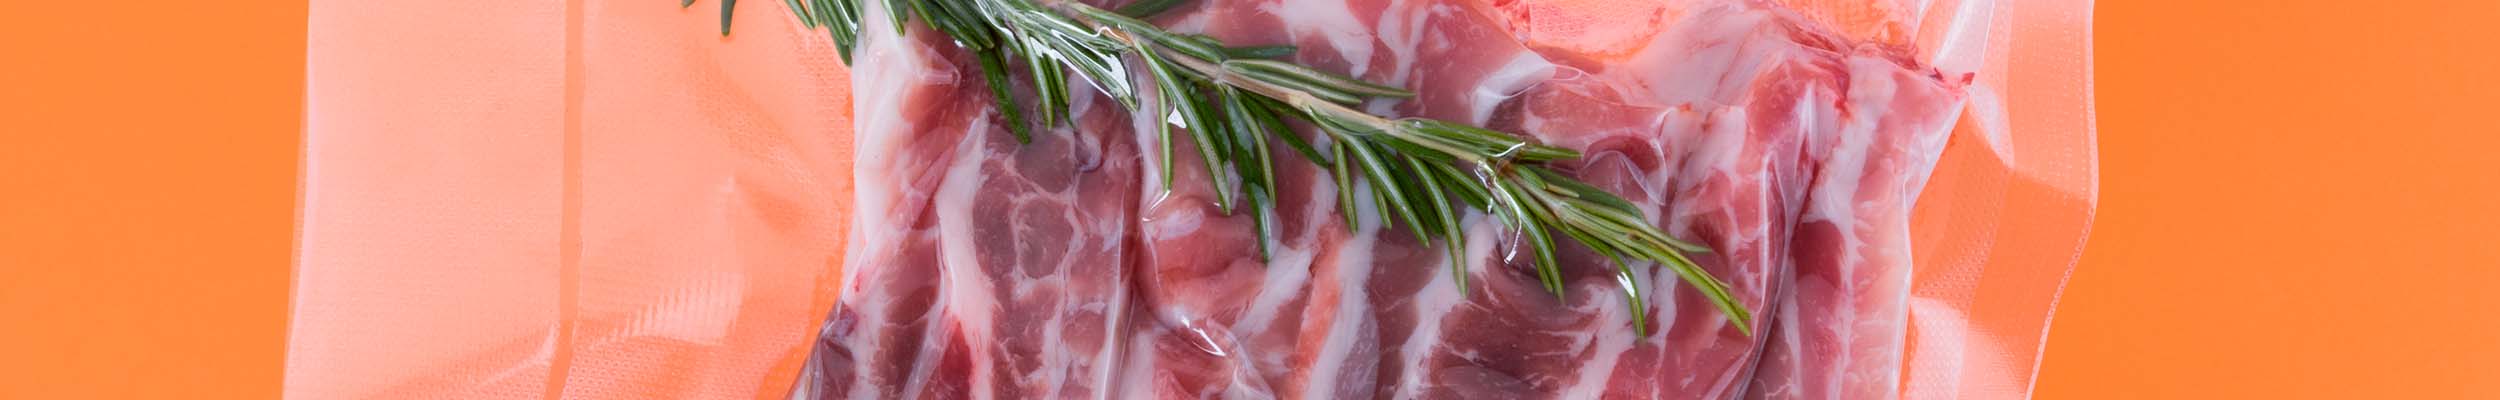 Sous Vide Vacuum Sealed Bag with Meat and Rosemary